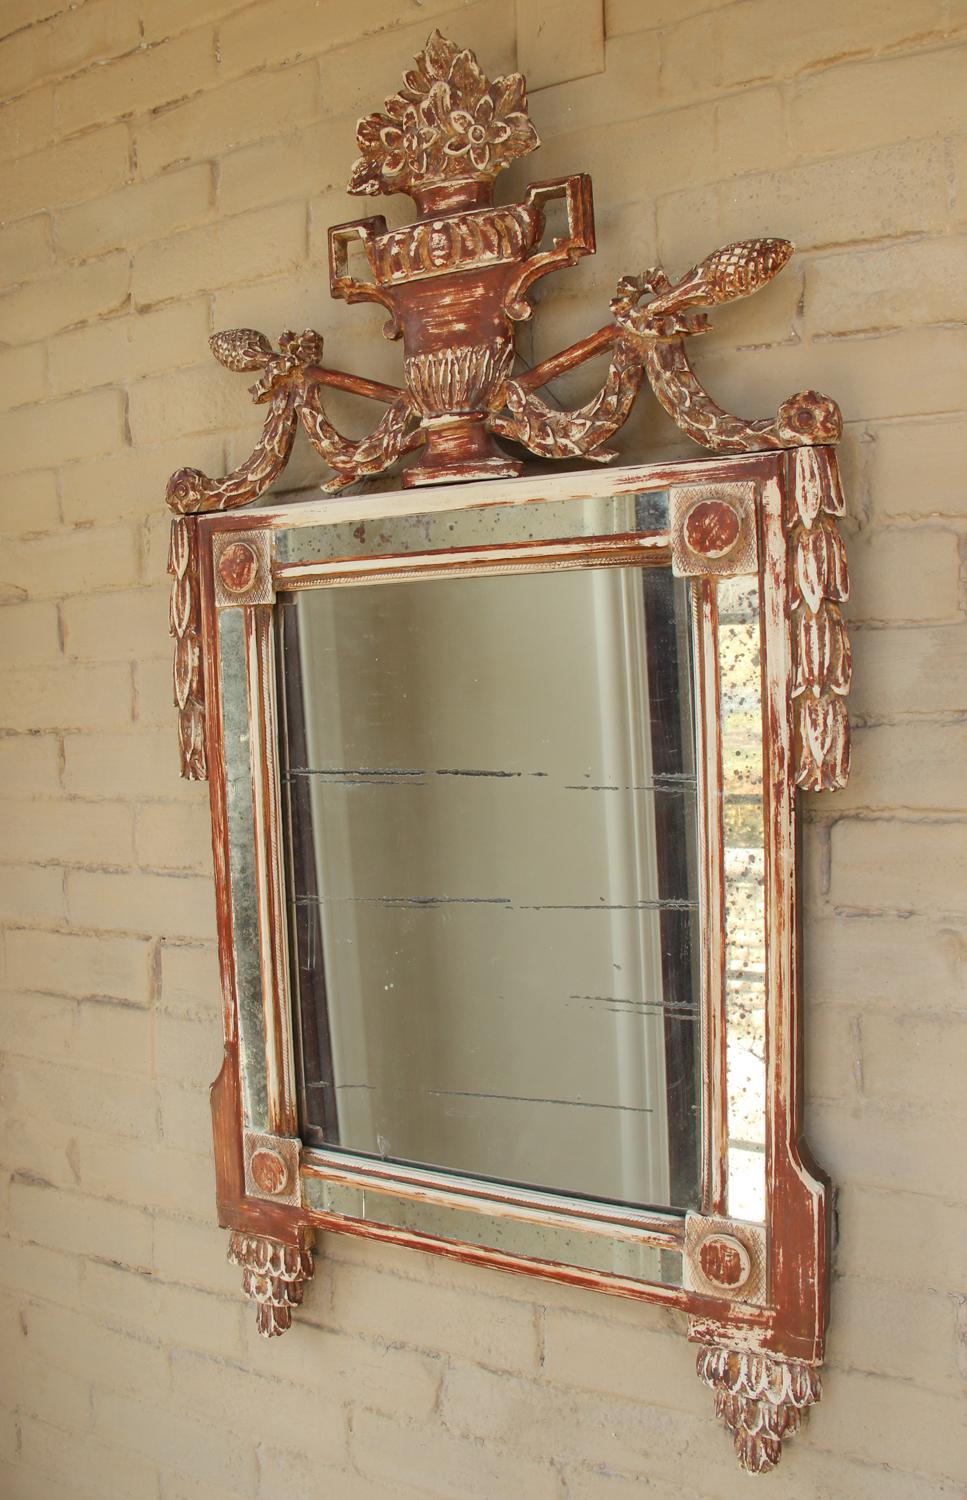 A beautiful example of French Louis XVI period mirror wearing old gesso and reddish - brown bole being base coats before gilt would have been applied. There are small traces of gilt. This stunning Louis Seize' period mirror has an urn pediment with